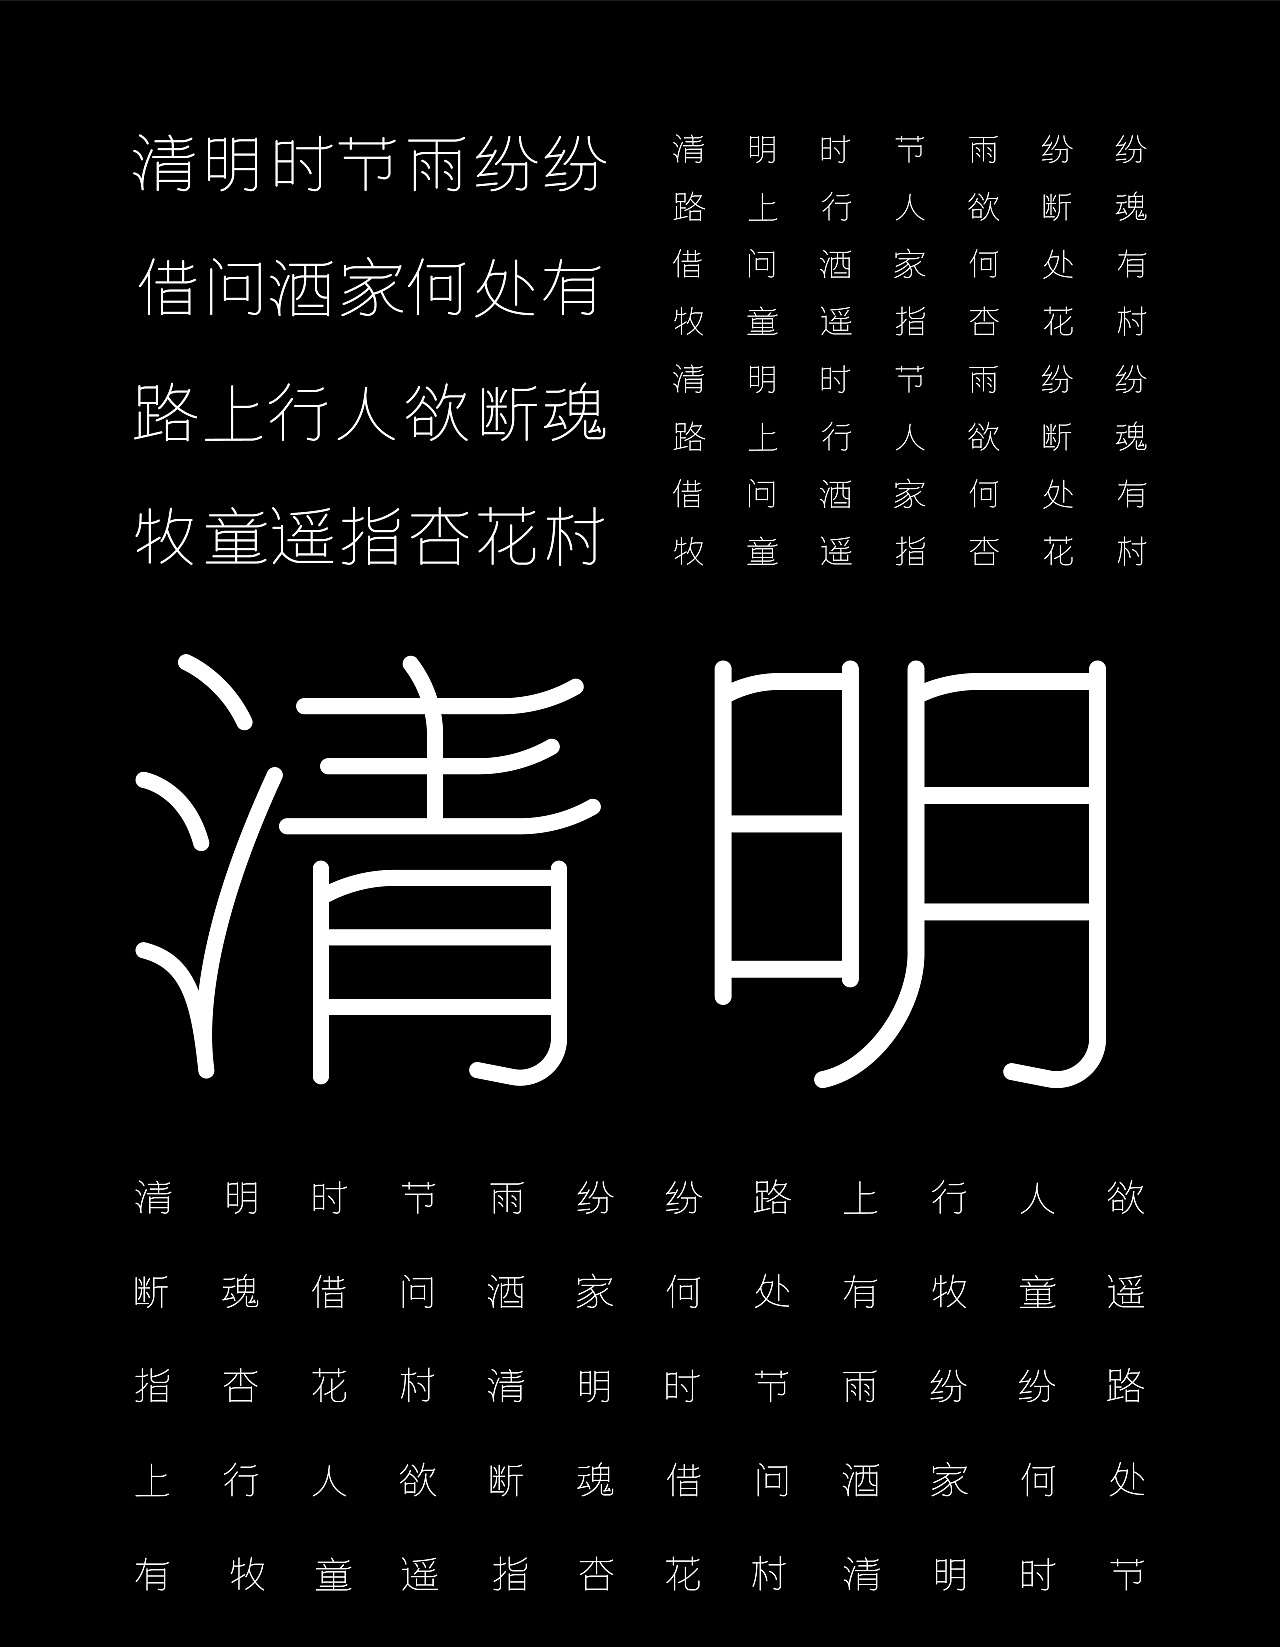 Chinese Creative Font Design-Appreciation of Ancient Poetry Design in Qingming